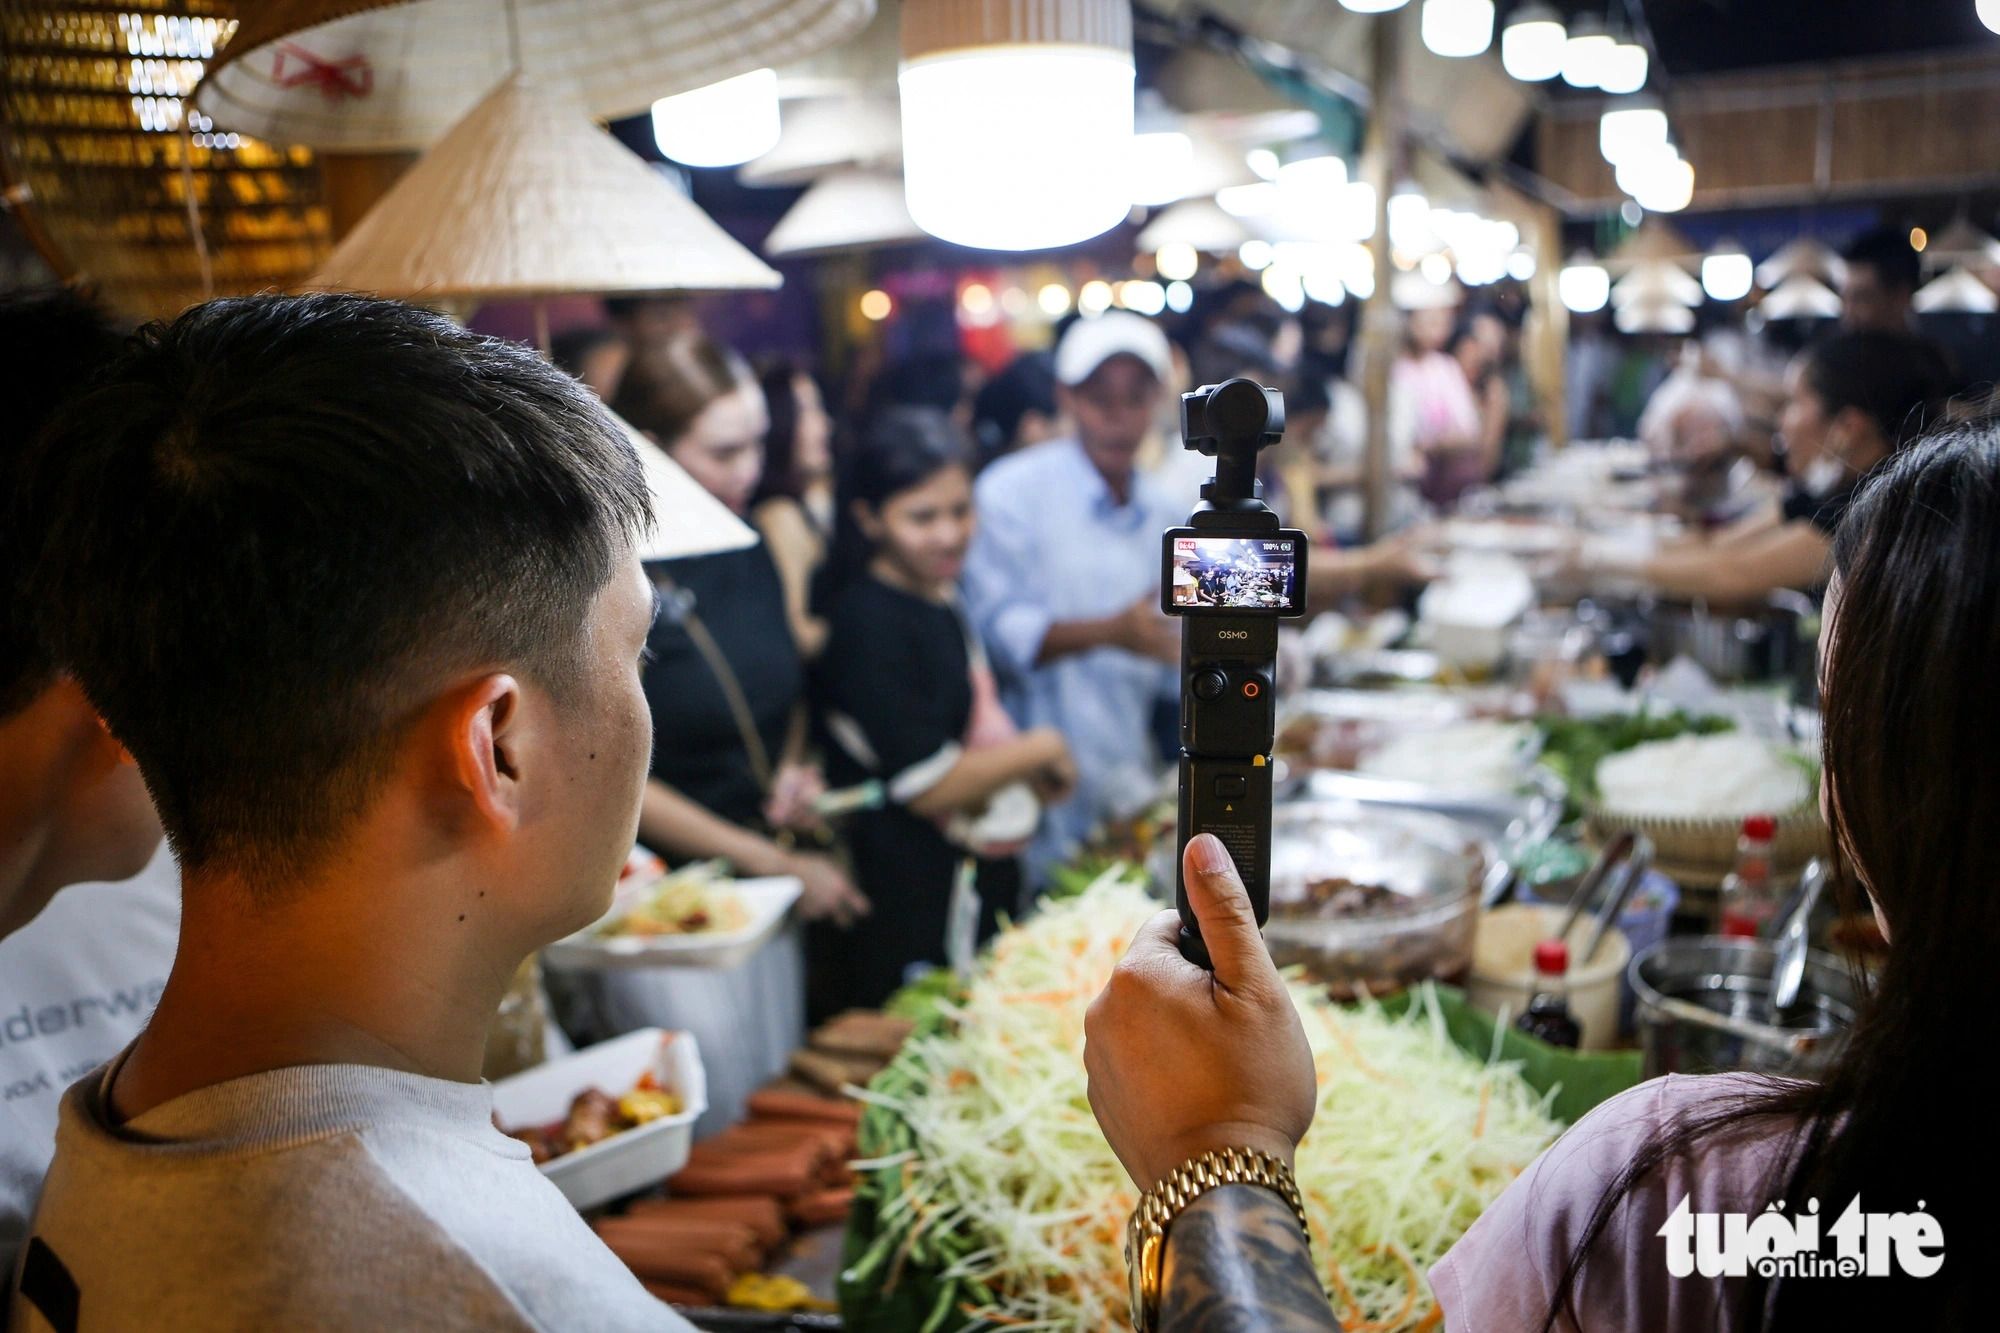 A Youtuber is seen filming a scene of the cuisine event held along Le Loi Boulevard in District 1, Ho Chi Minh City. Photo: Phuong Quyen / Tuoi Tre